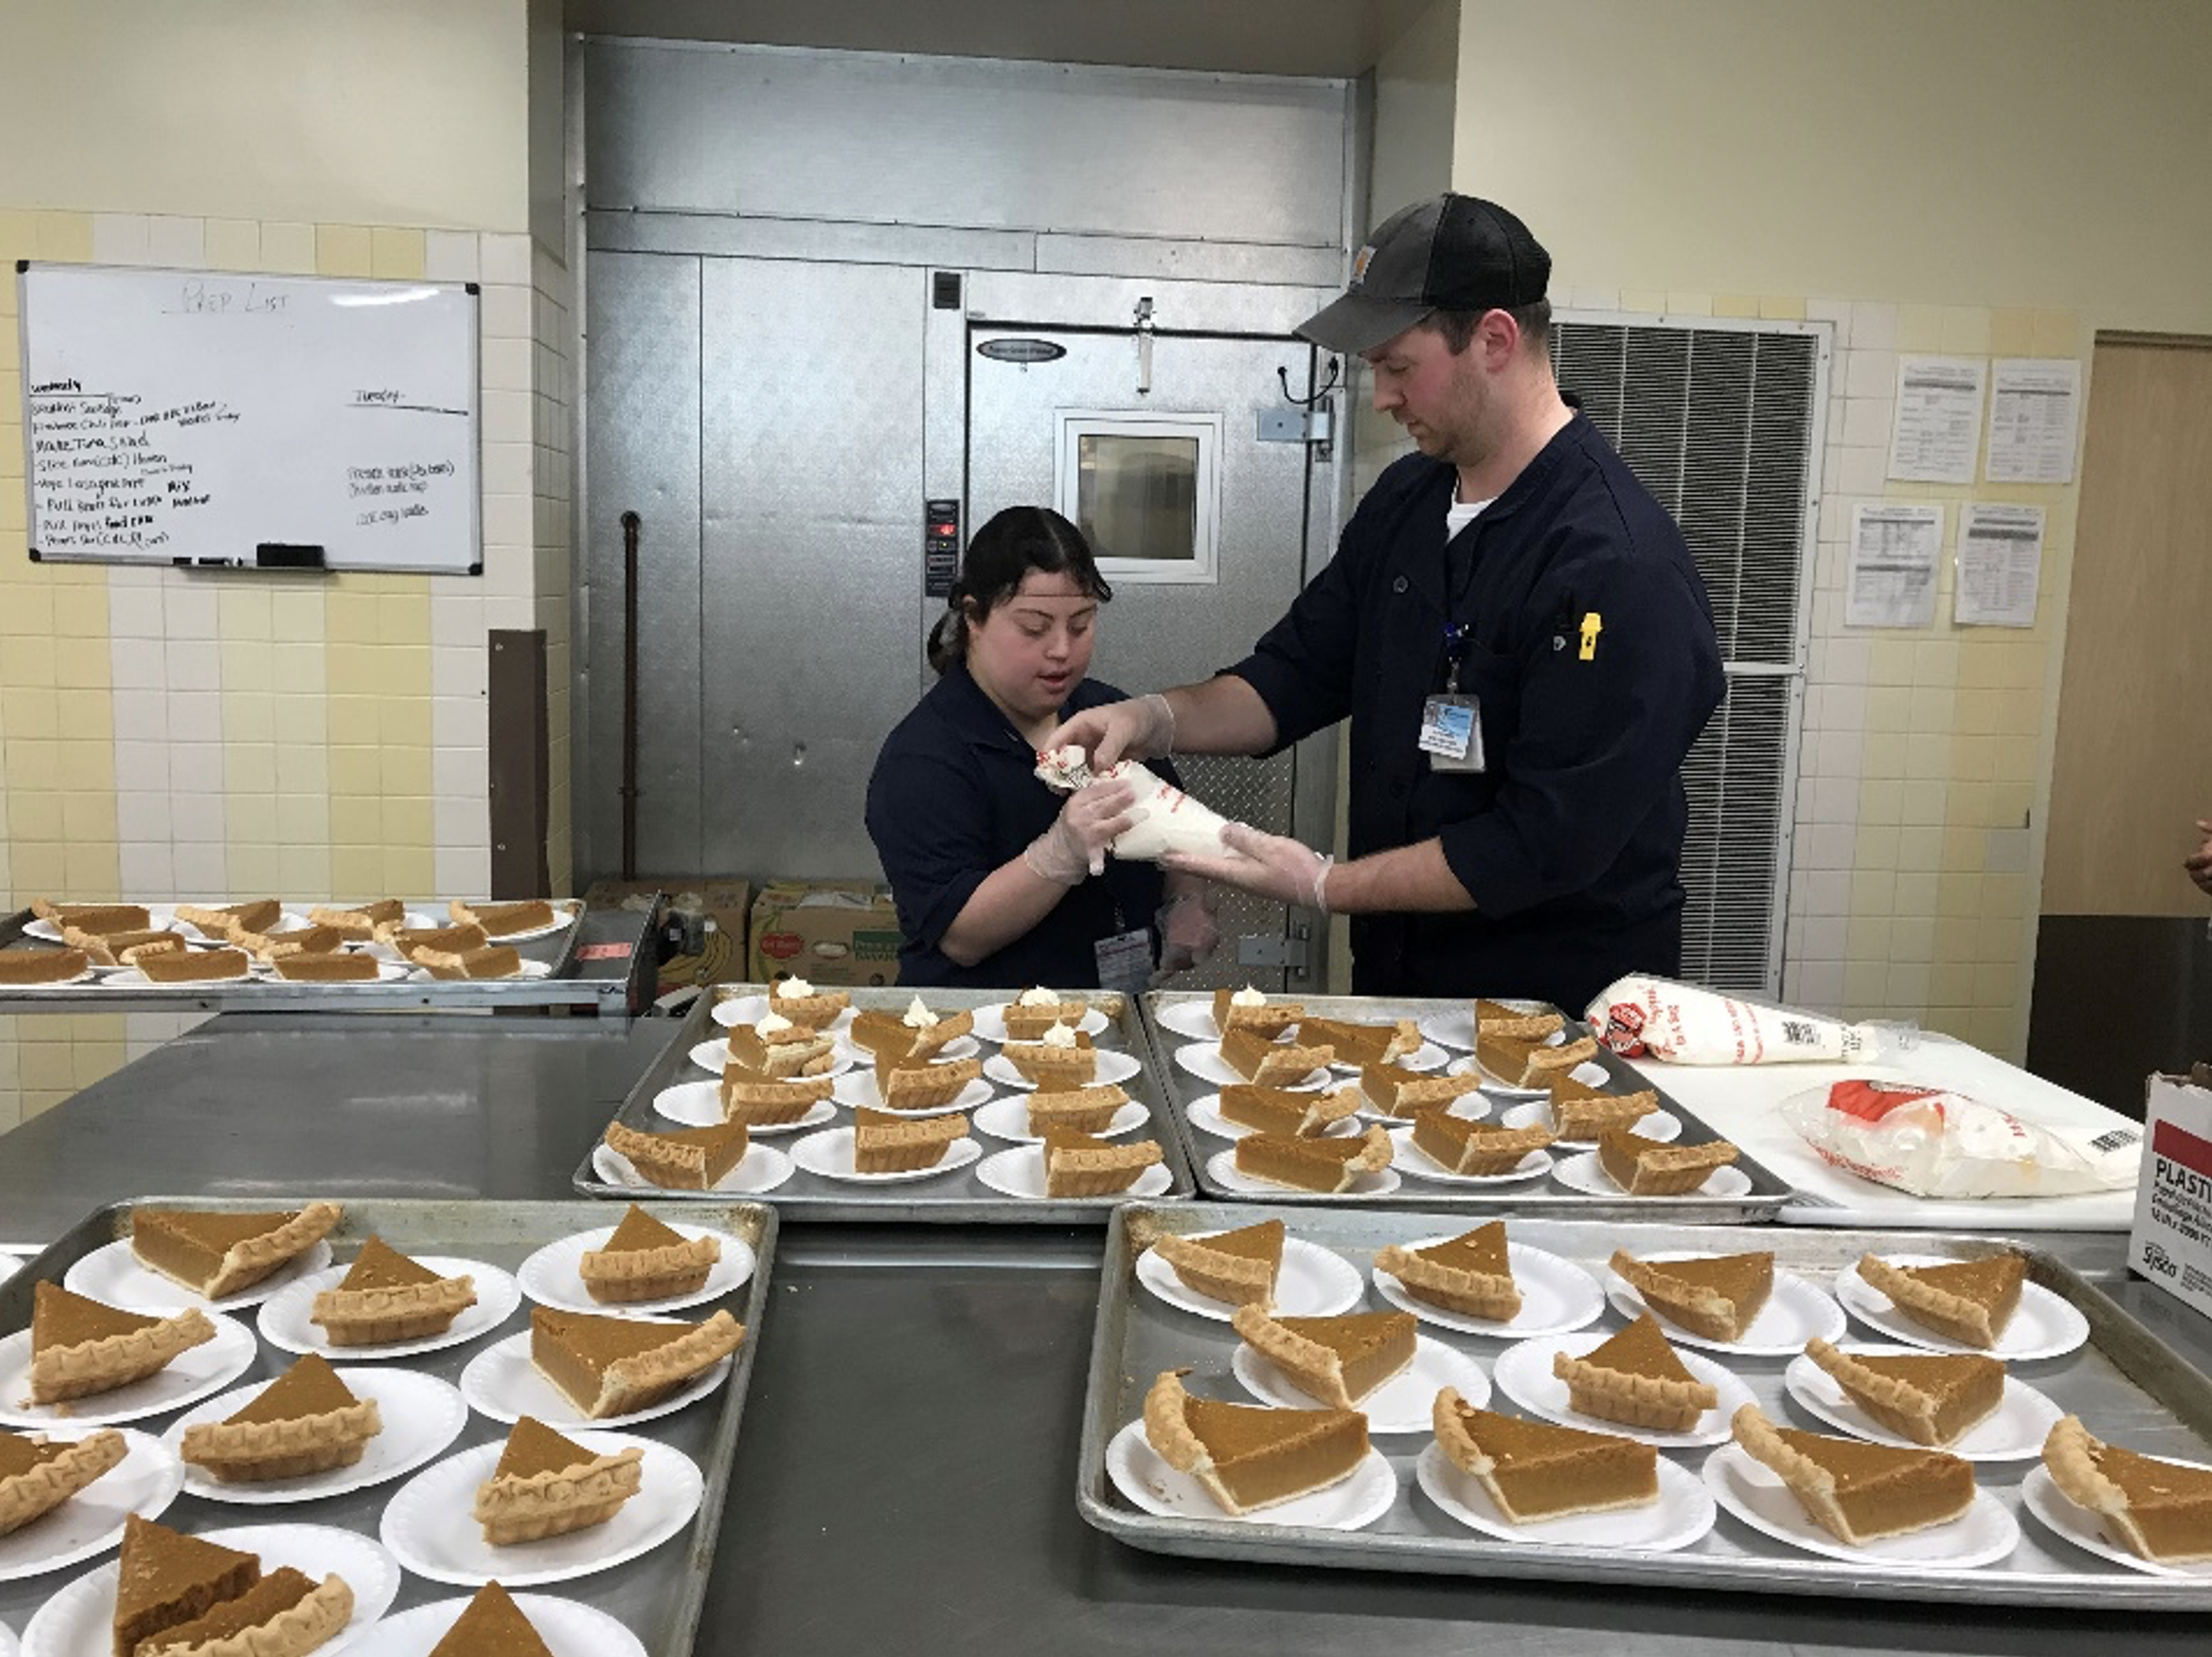 A Project SEARCH intern works with a chef in the kitchen as he shows her how to use a piping bag on slices of pumpkin pie.